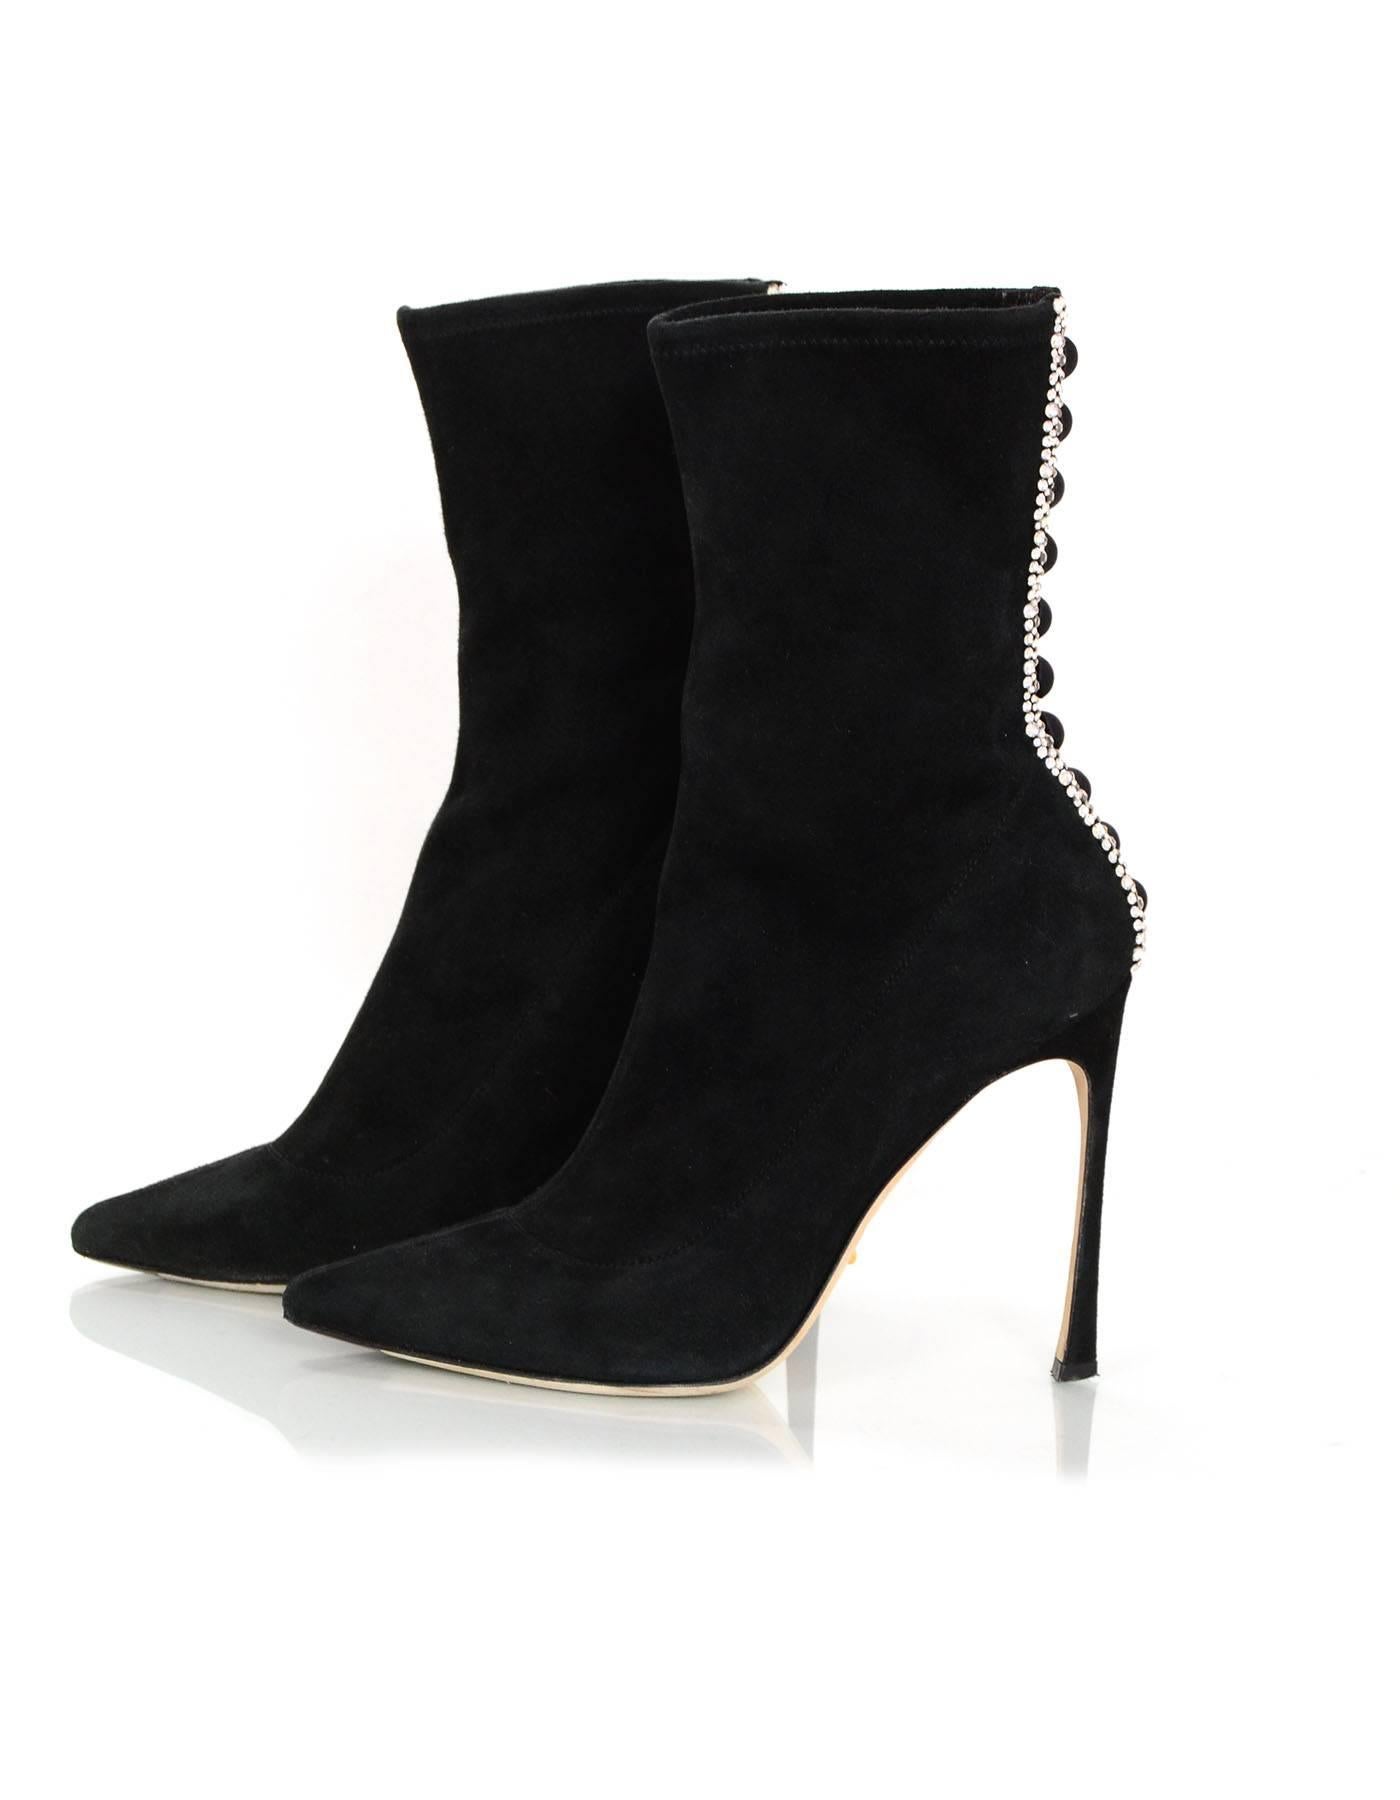 Sergio Rossi Black Suede Pointed Toe Boots 
Features crystal and silk button detailing at back of boots

Made In: Italy
Color: Black
Materials: Suede, crystal and silk
Closure/Opening: Pull on
Sole Stamp: Vero Cuoio Made in Italy 38